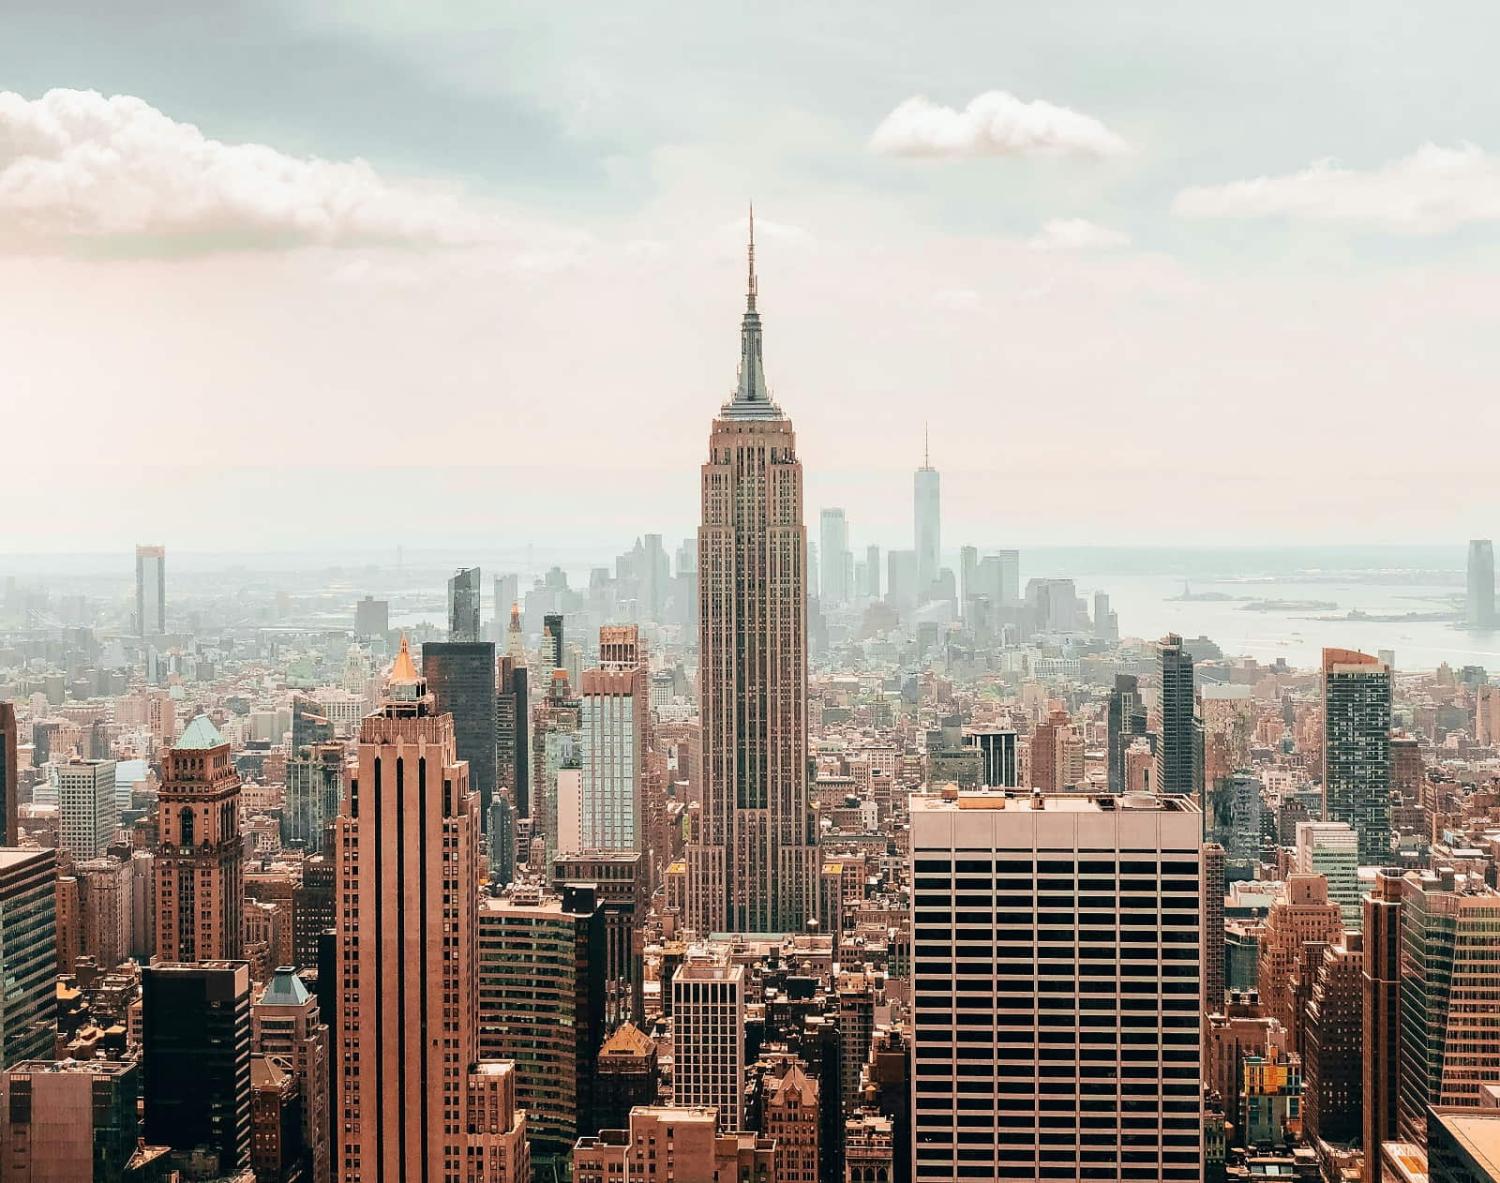 The Empire State Building was built in a year and came in 17 per cent under budget (Christian Ladewing/Unsplash)